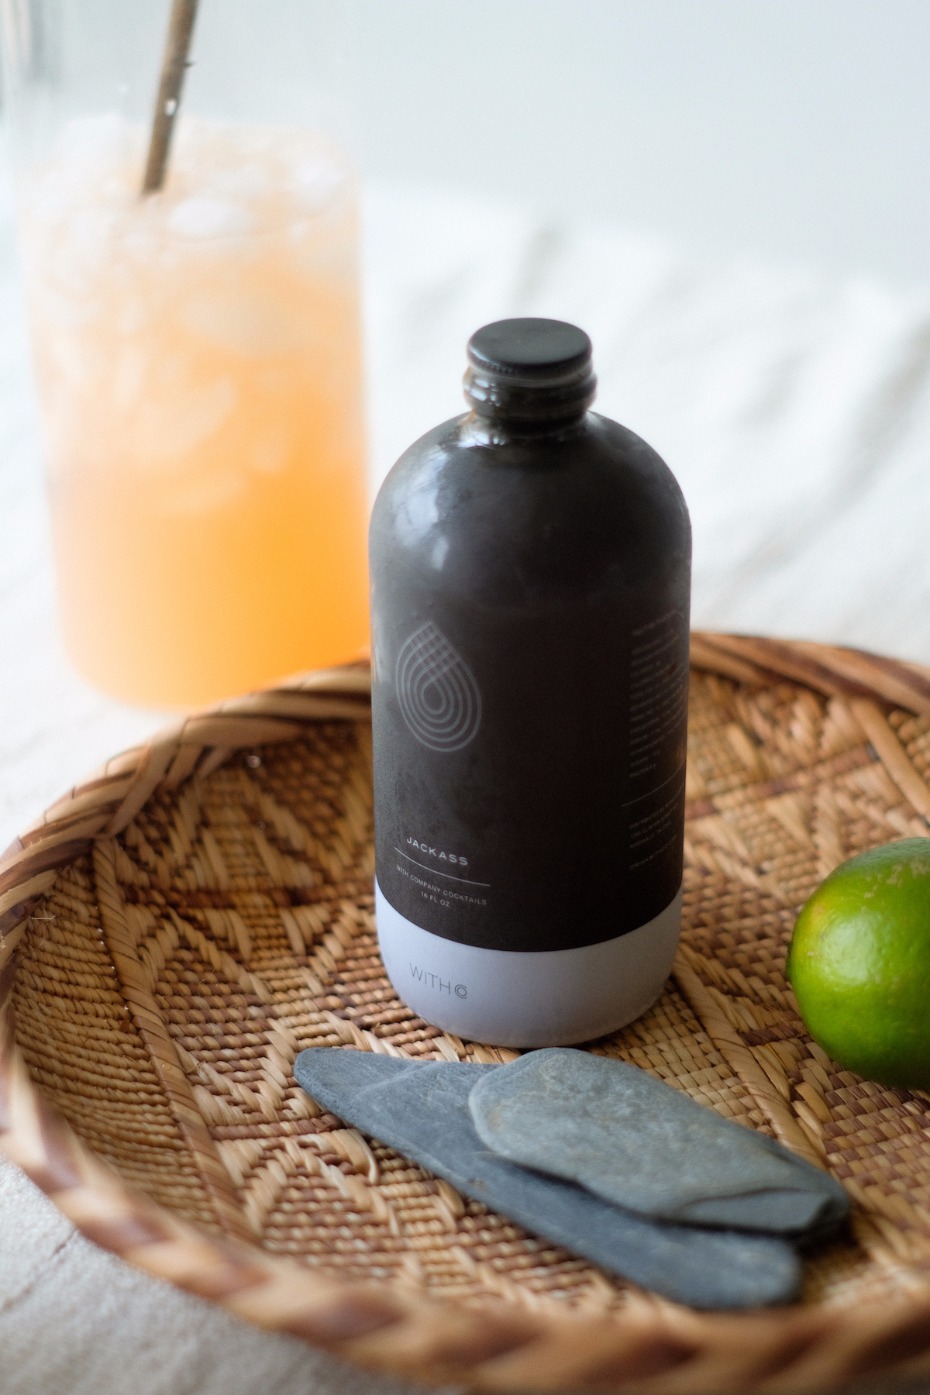 WithCo creates bottled cocktails using only fresh, real ingredients and no preservatives.